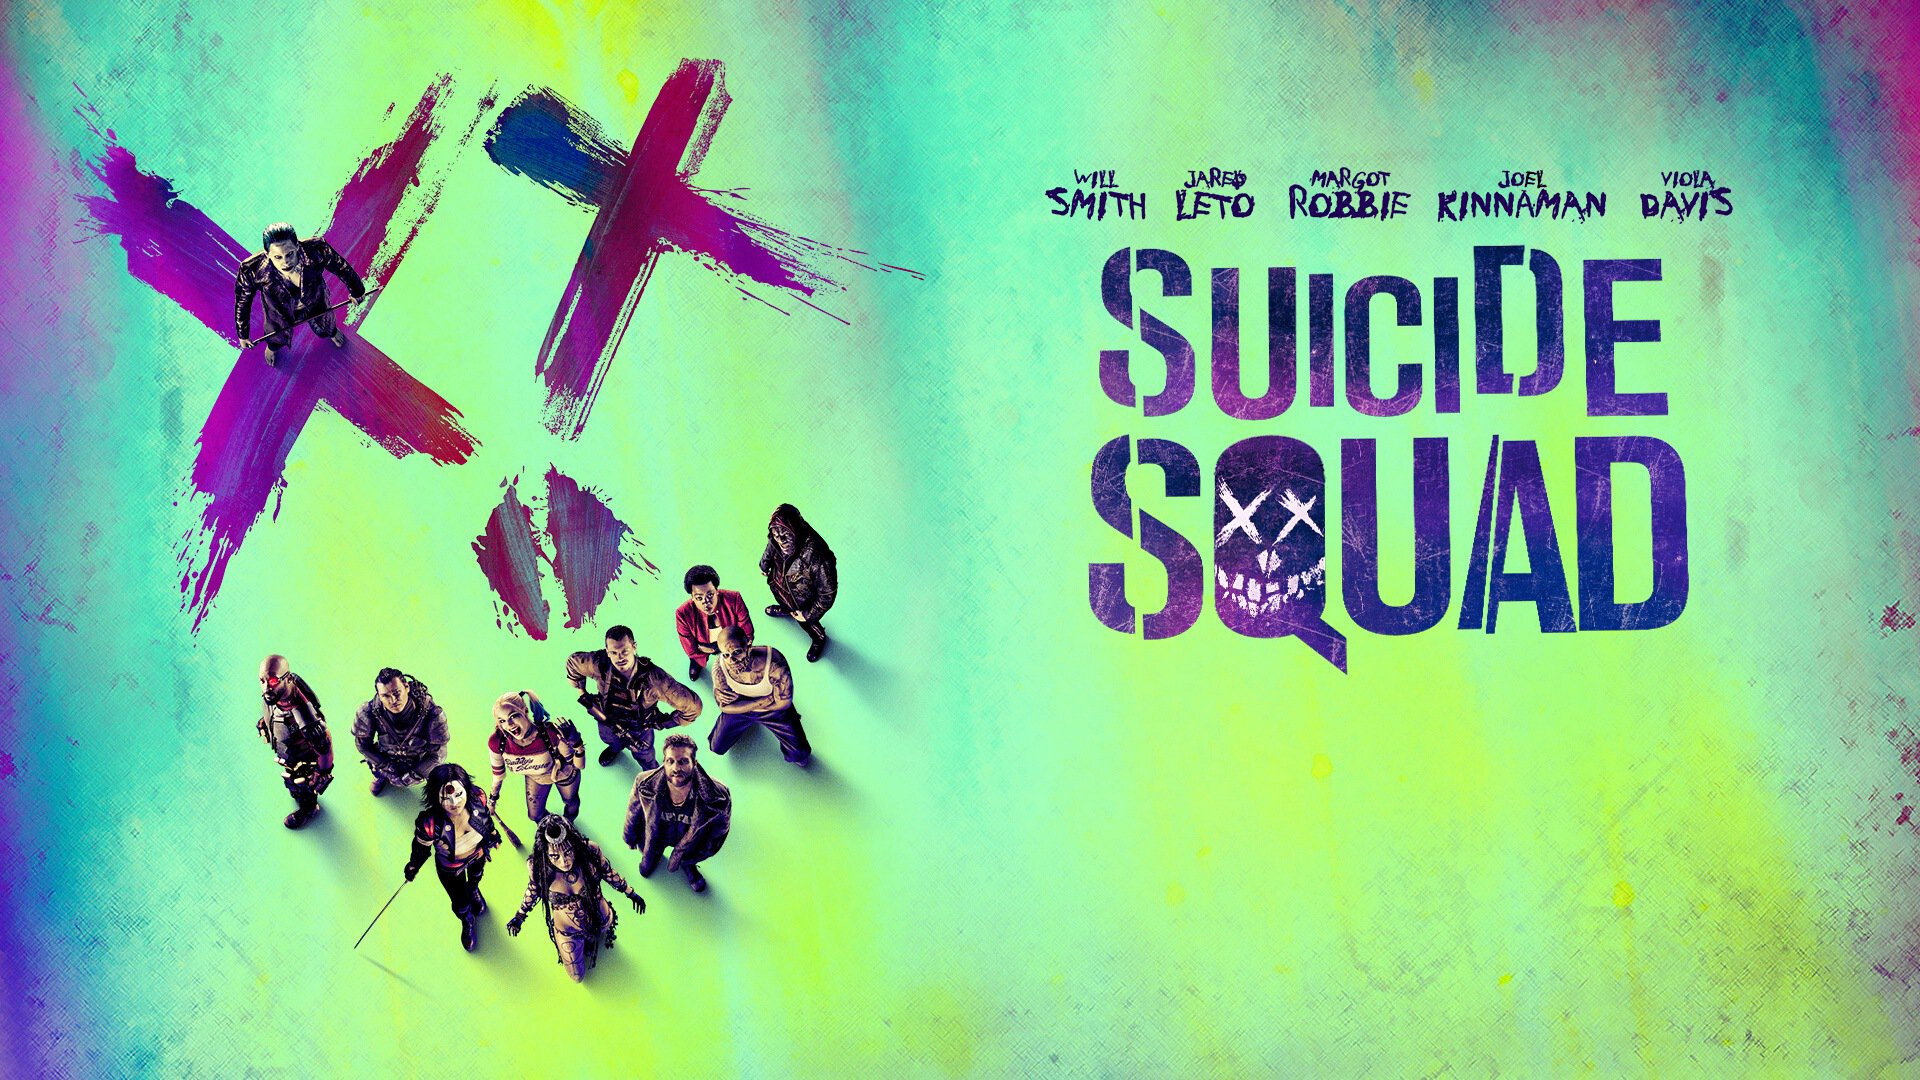 Suicide Squad: The team will be used to combat metahuman threats, under Waller's control via nanite bombs implanted in each criminal's neck, which can be remotely detonated if they try to rebel or escape, DCEU. 1920x1080 Full HD Background.